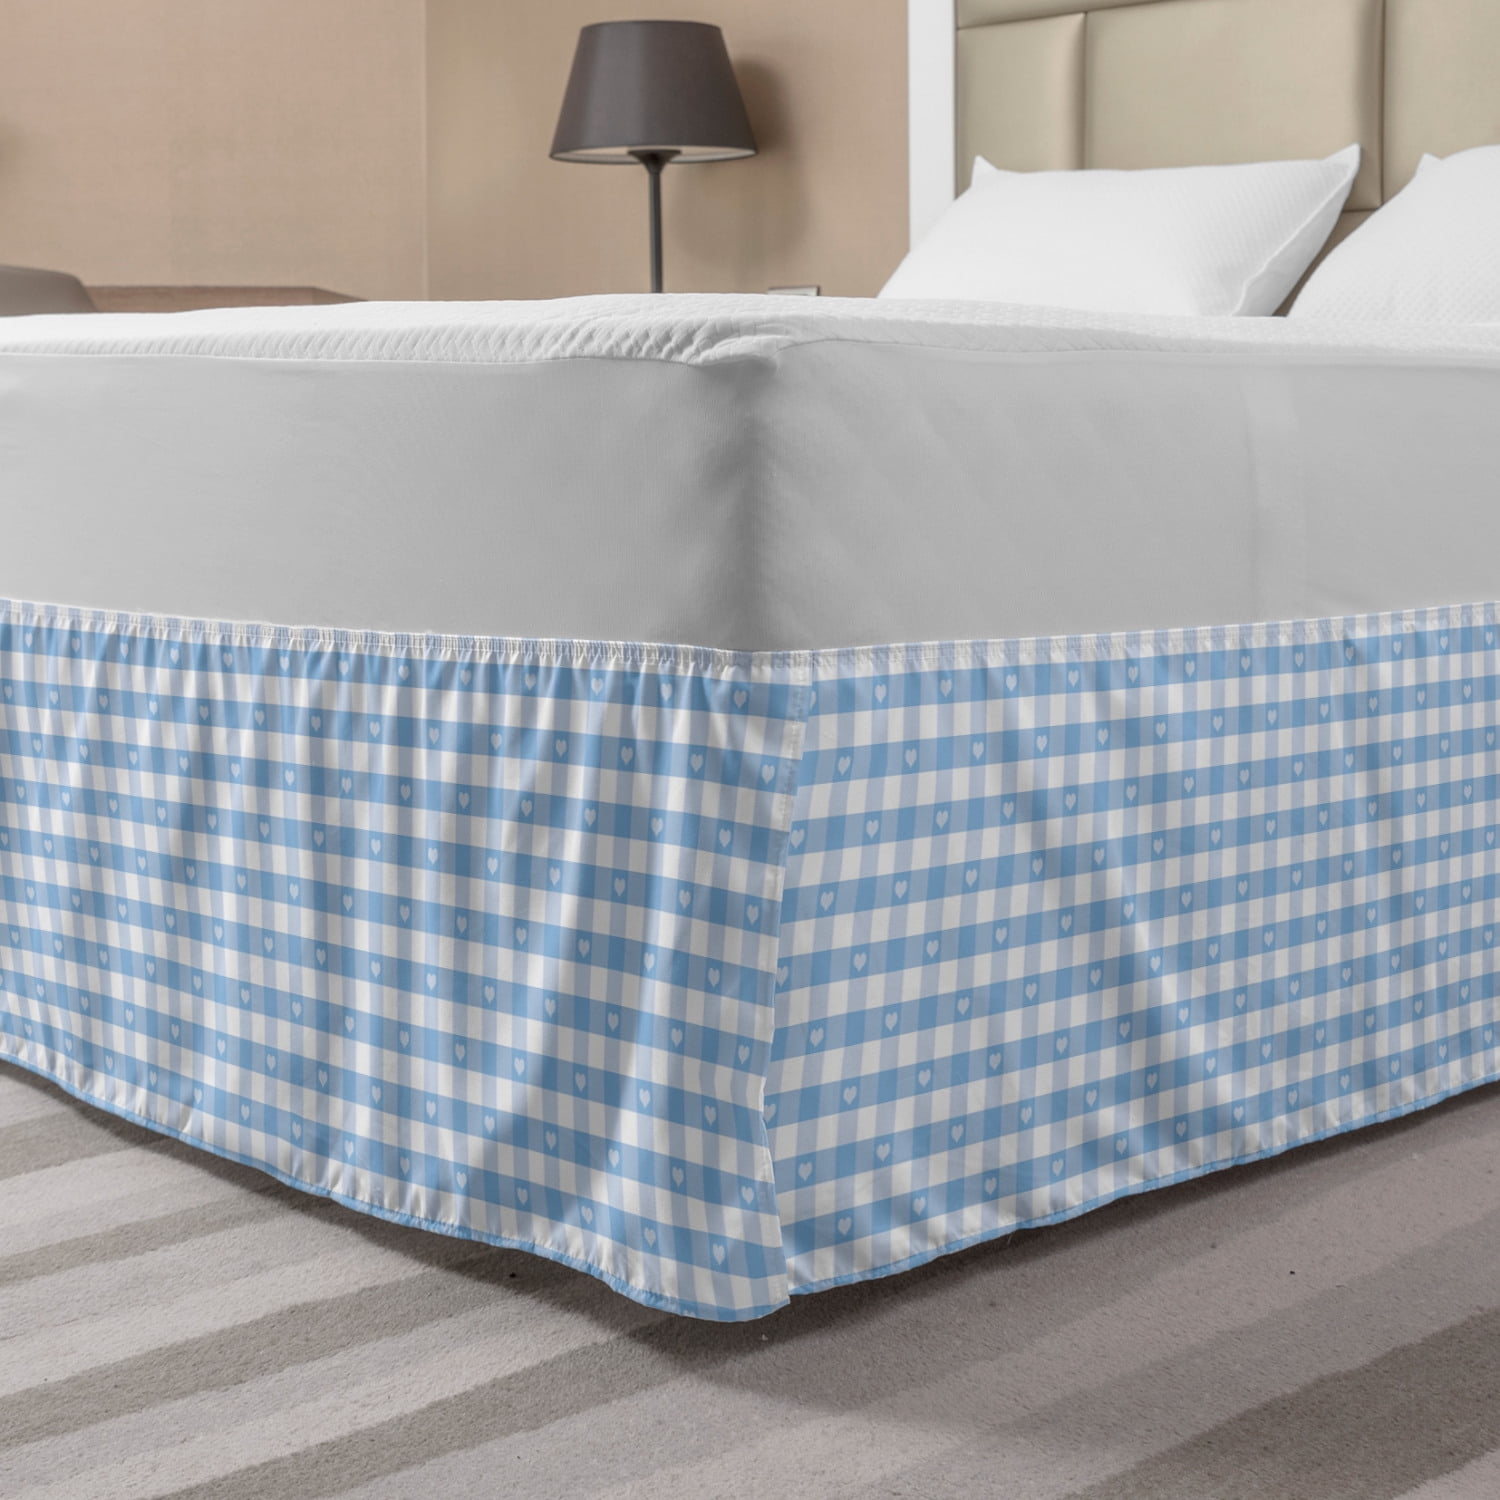 Checkered Bed Skirt, Gingham Motif with Little Hearts Pastel Blue Baby ...